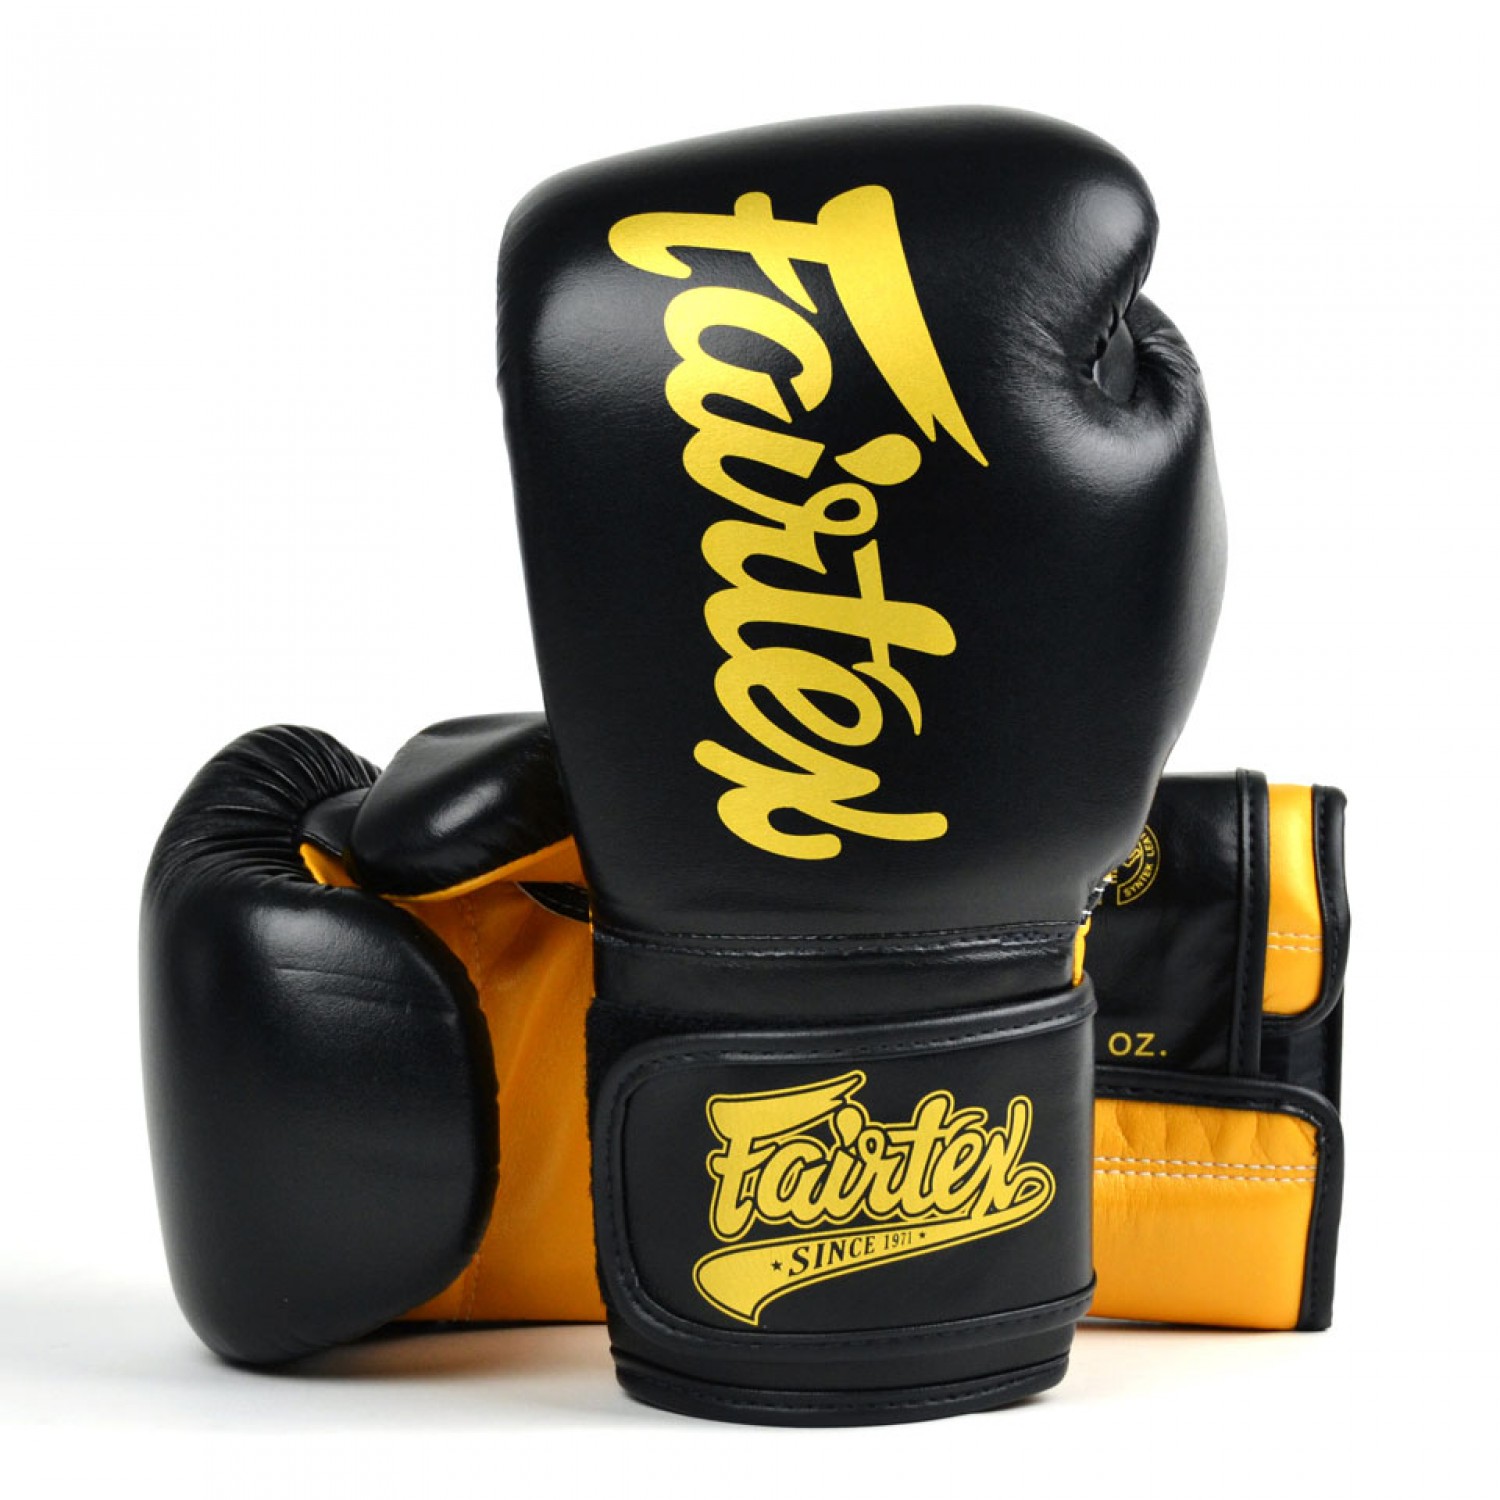 Fairtex Super Sparring Black/Gold Boxing Gloves - Click Image to Close